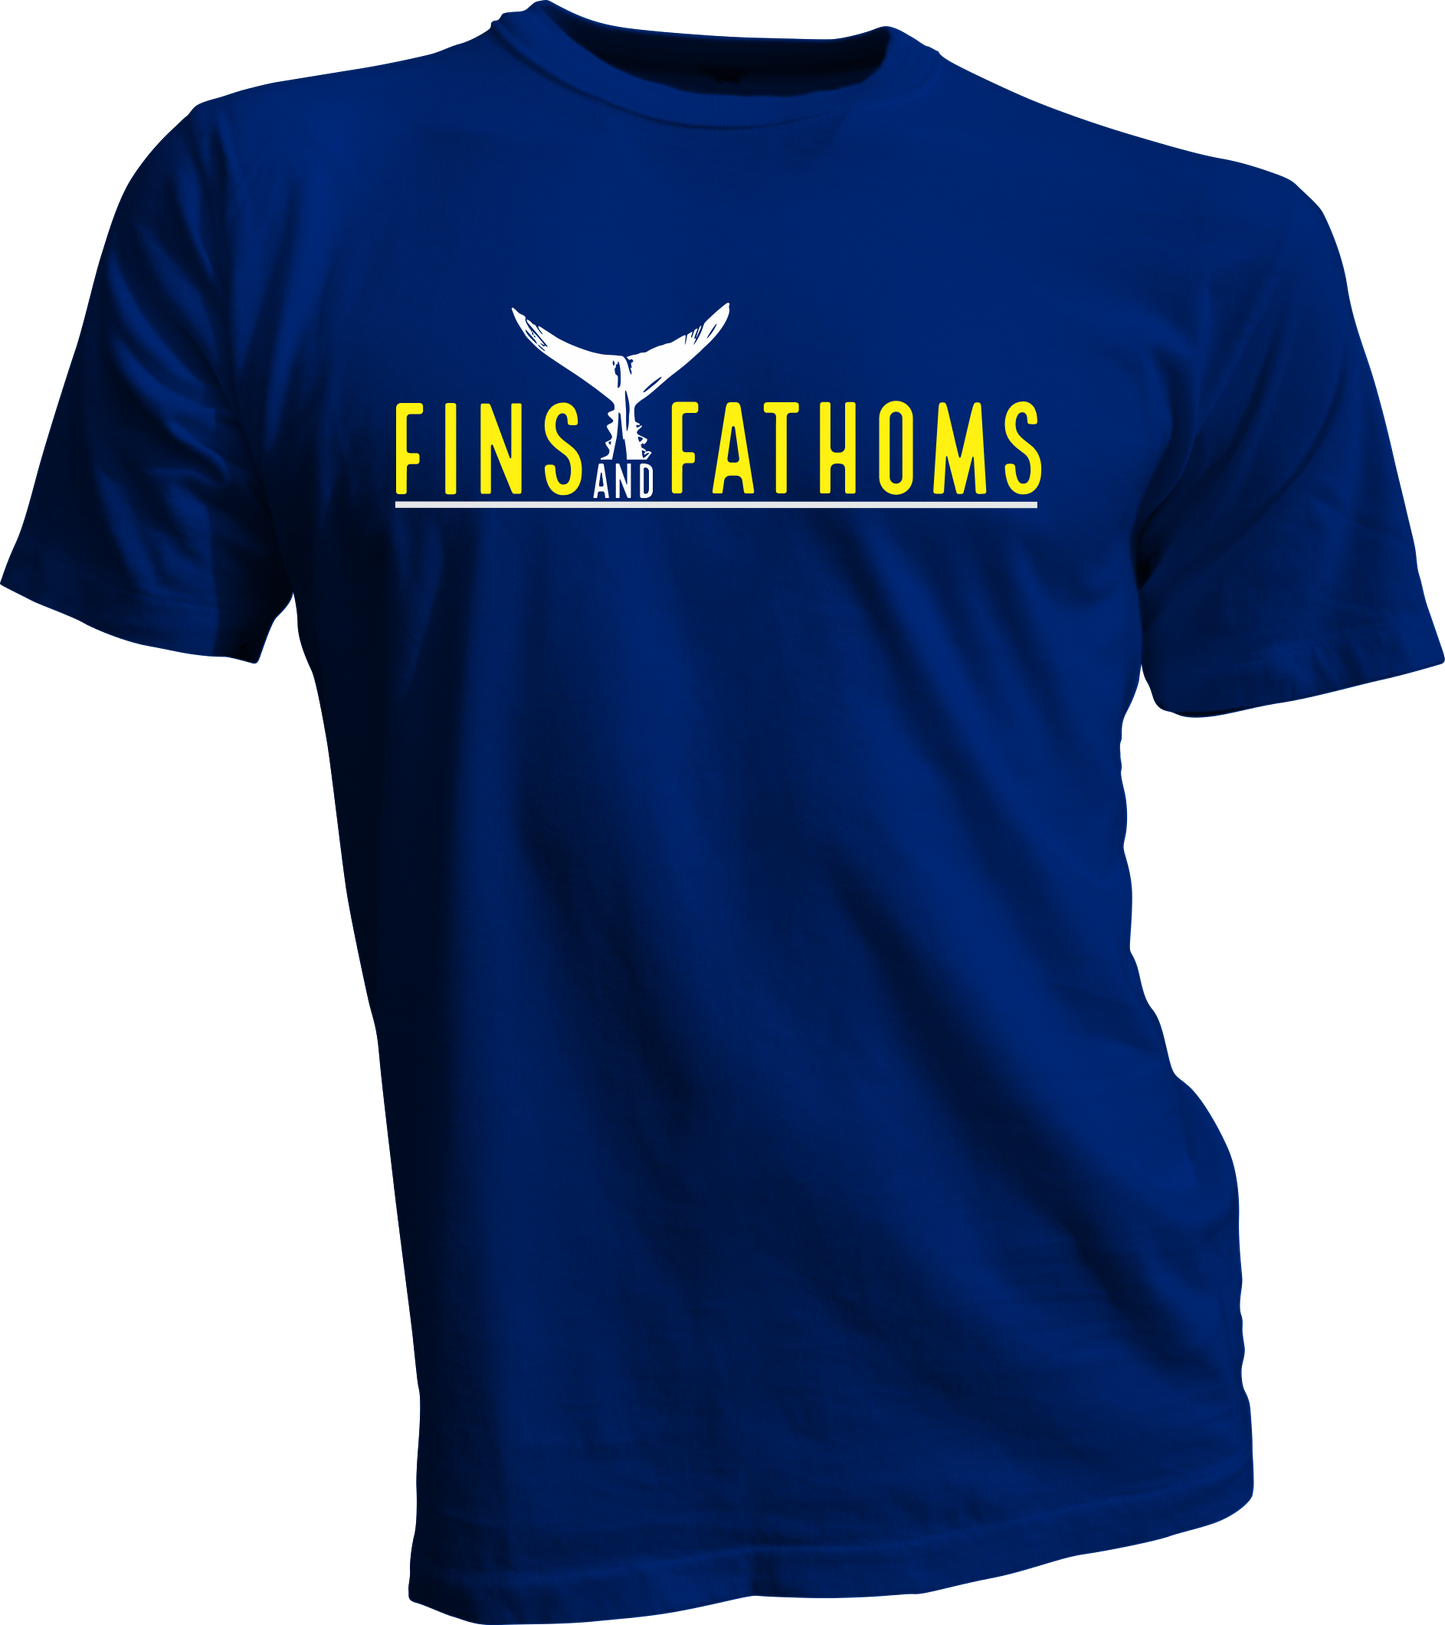 Fins and Fathoms